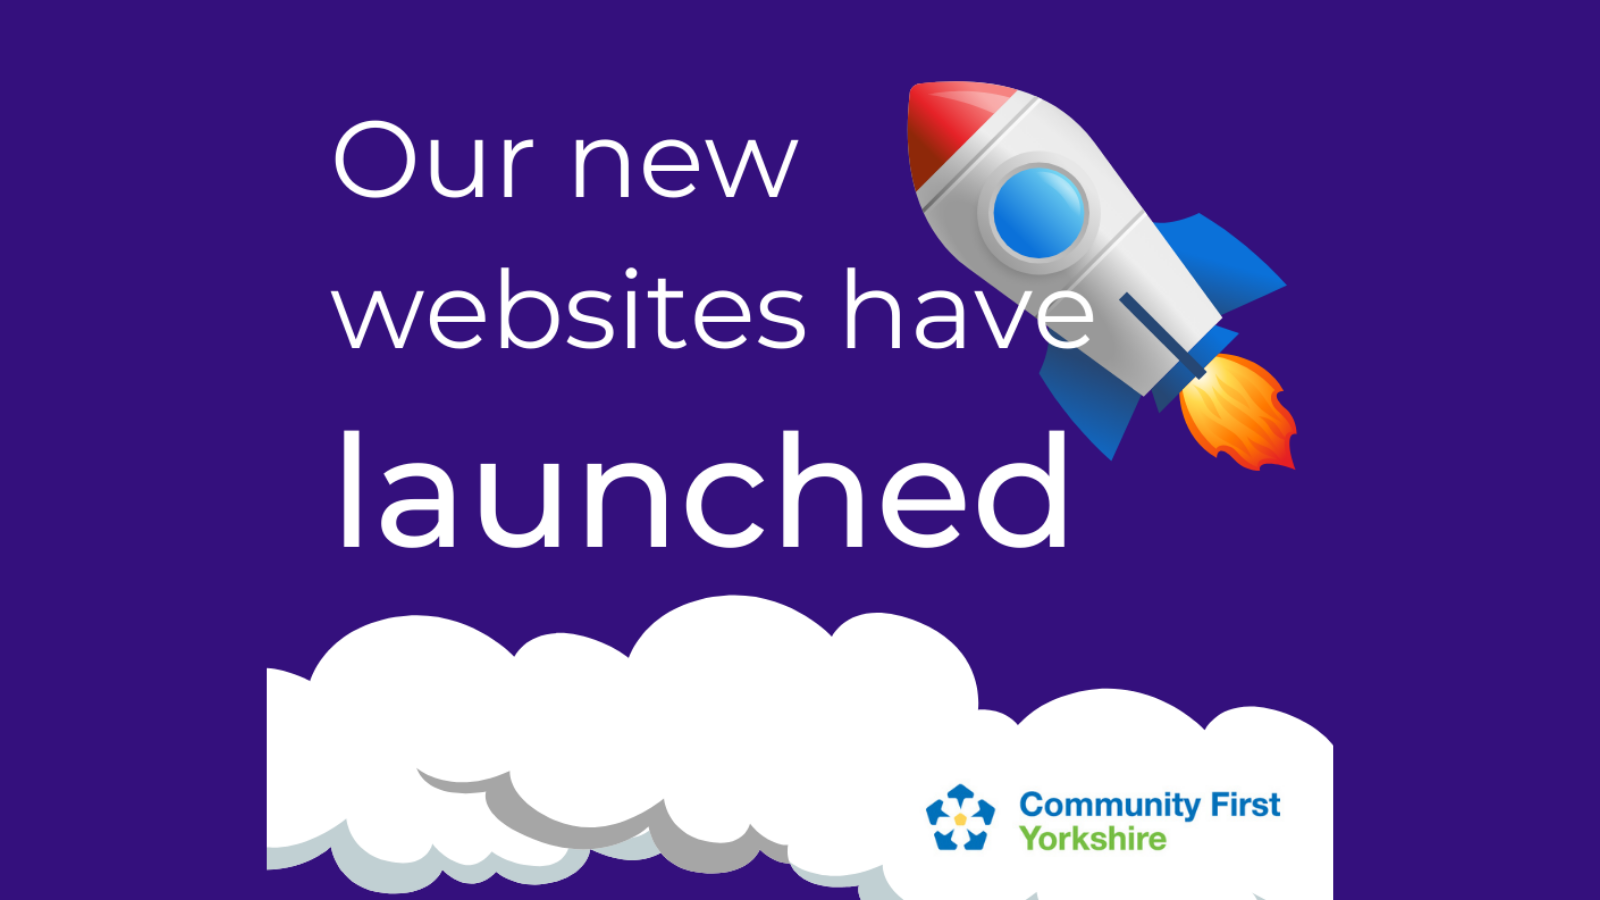 Community First Yorkshire new website launched